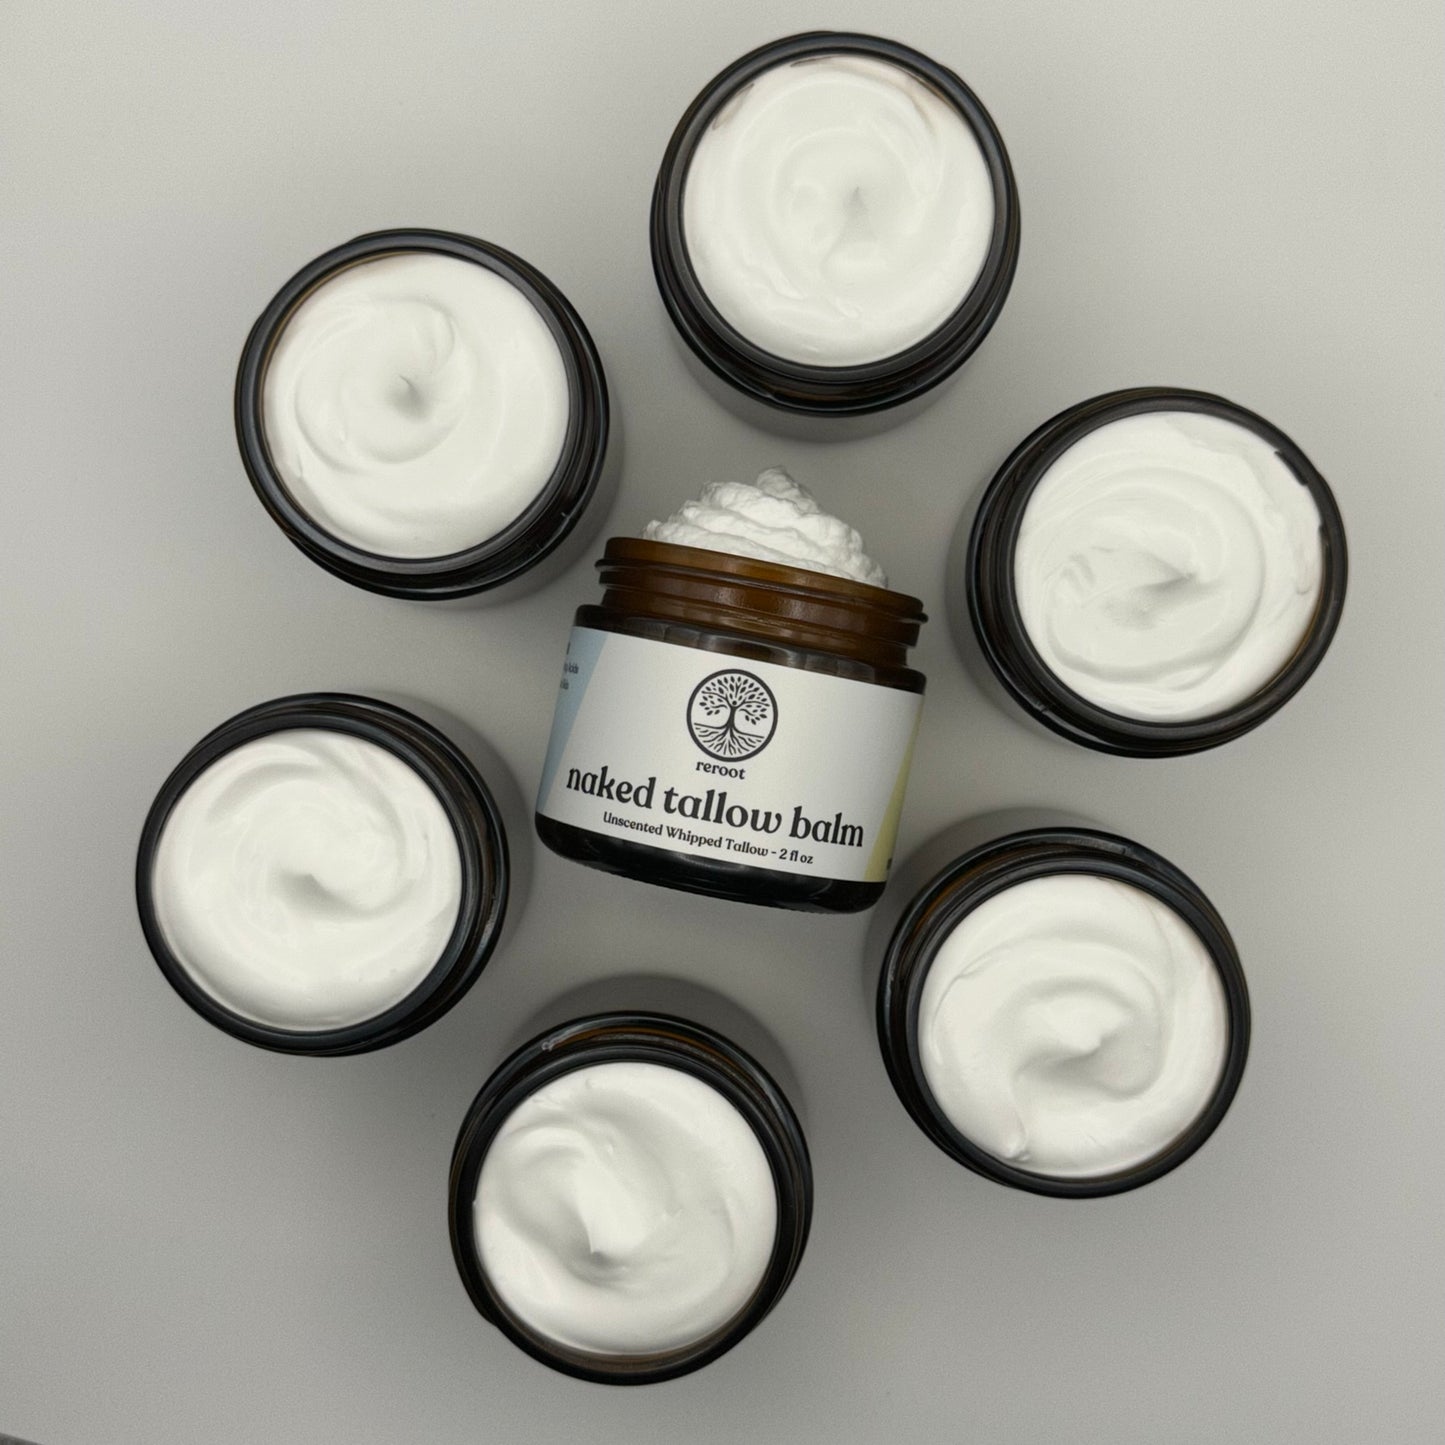 Naked Tallow - 1 Ingredient - 100% Grass-Fed Tallow - Unlimited Uses for All Skin Types